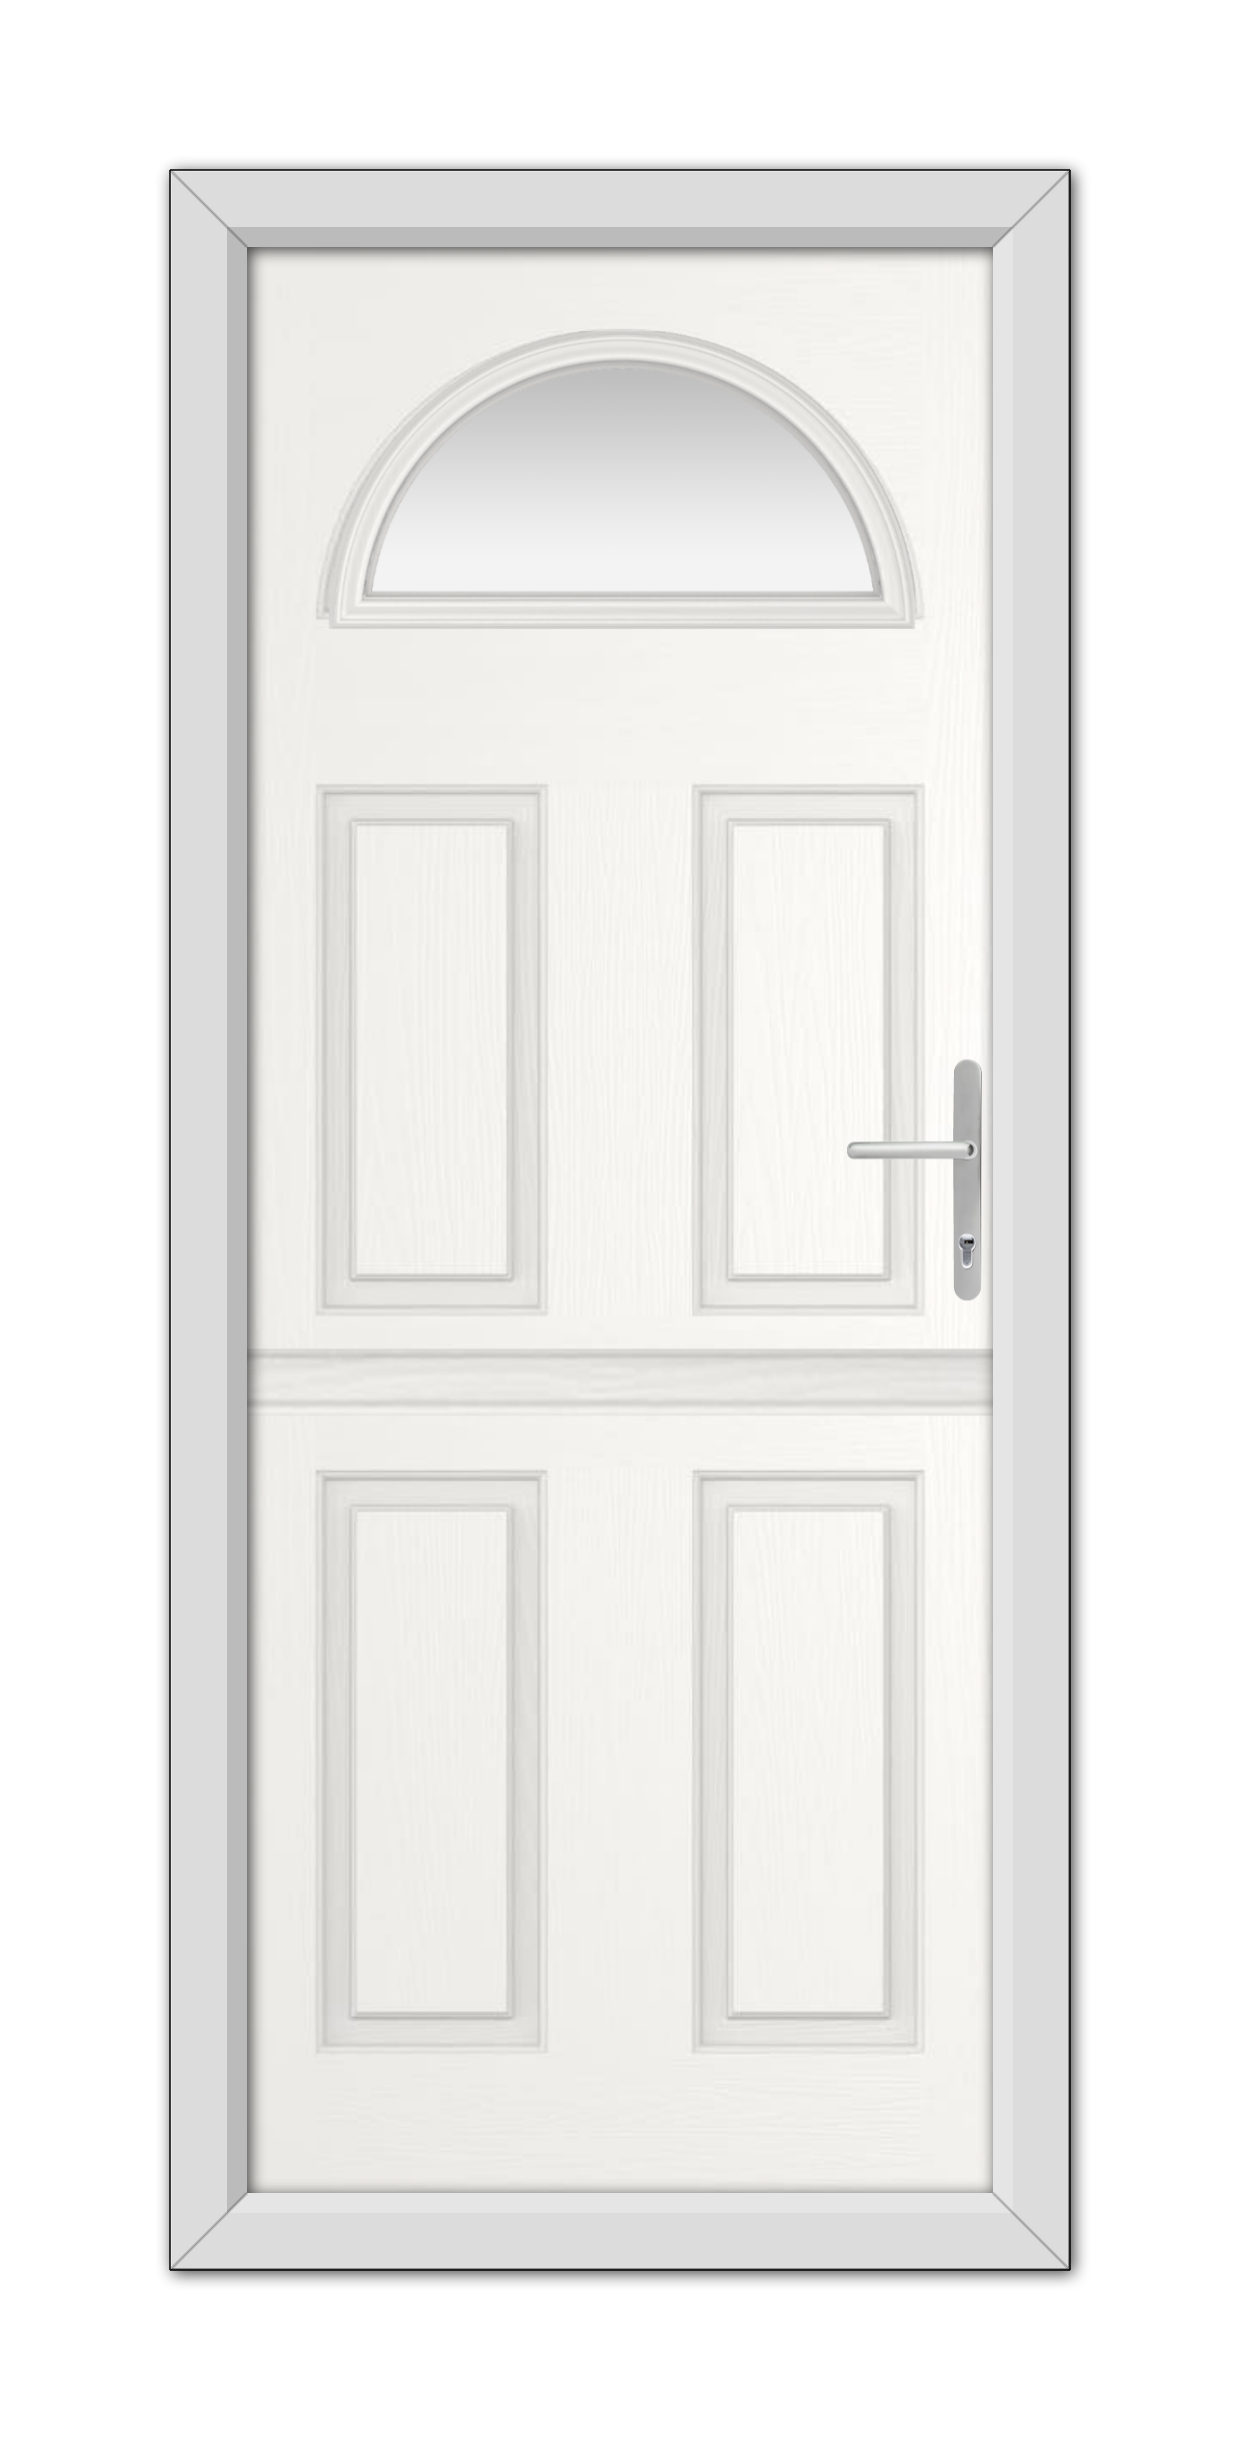 A White Winslow 1 Stable Composite Door 48mm Timber Core with six panels and a semicircular translucent window at the top, featuring a metal handle on the right side.